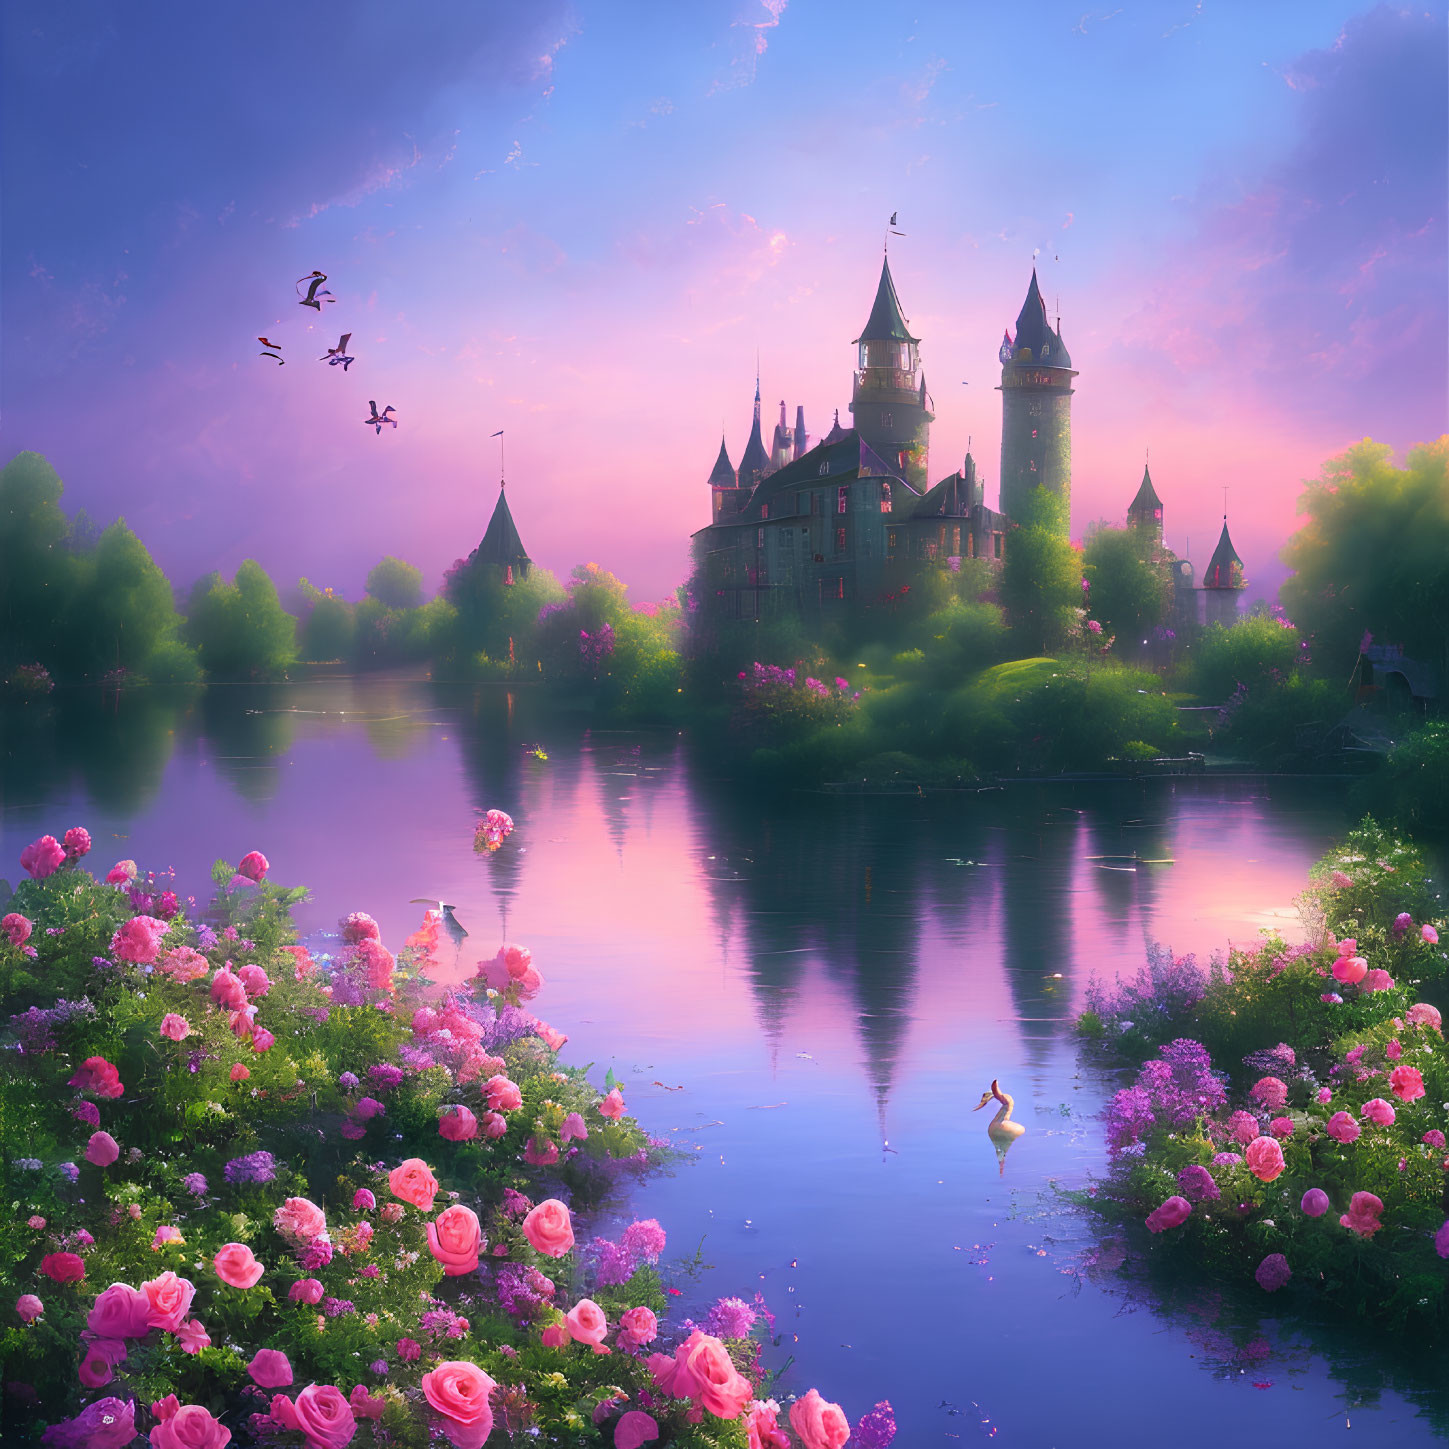 Fairytale Castle Reflecting in Tranquil Lake Amid Pink Roses